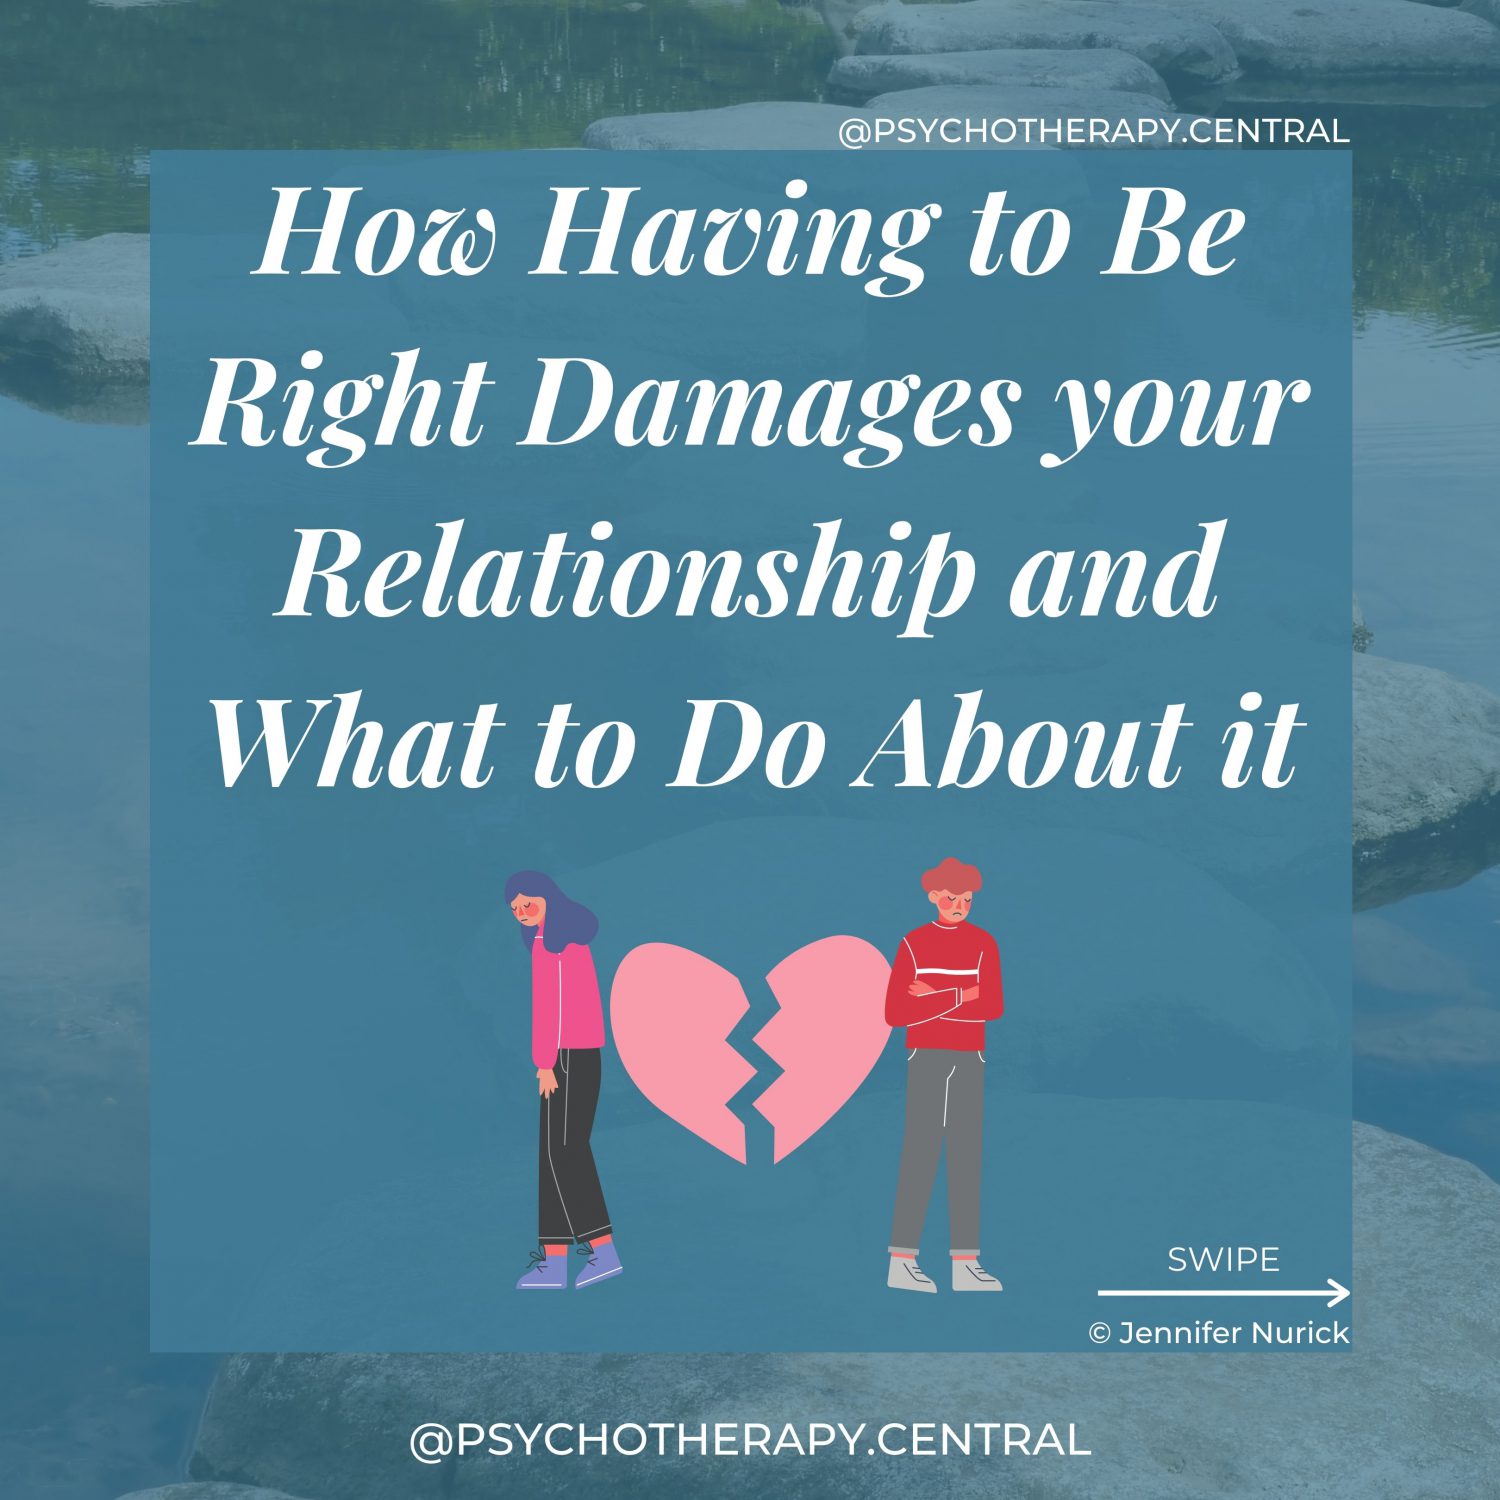 How Having to Be Right Damages your Relationship and What to Do About it. Always having to be right comes from perfectionism – If you are not correct, you are not perfect One person feels wrong all the time; this can negatively affect self-esteem There is an imbalance in the relationship, with the ‘always right’ person having more power and perhaps being a bully When one person always has to be wrong, they may stop expressing their genuine opinion and withdraw from the relationship